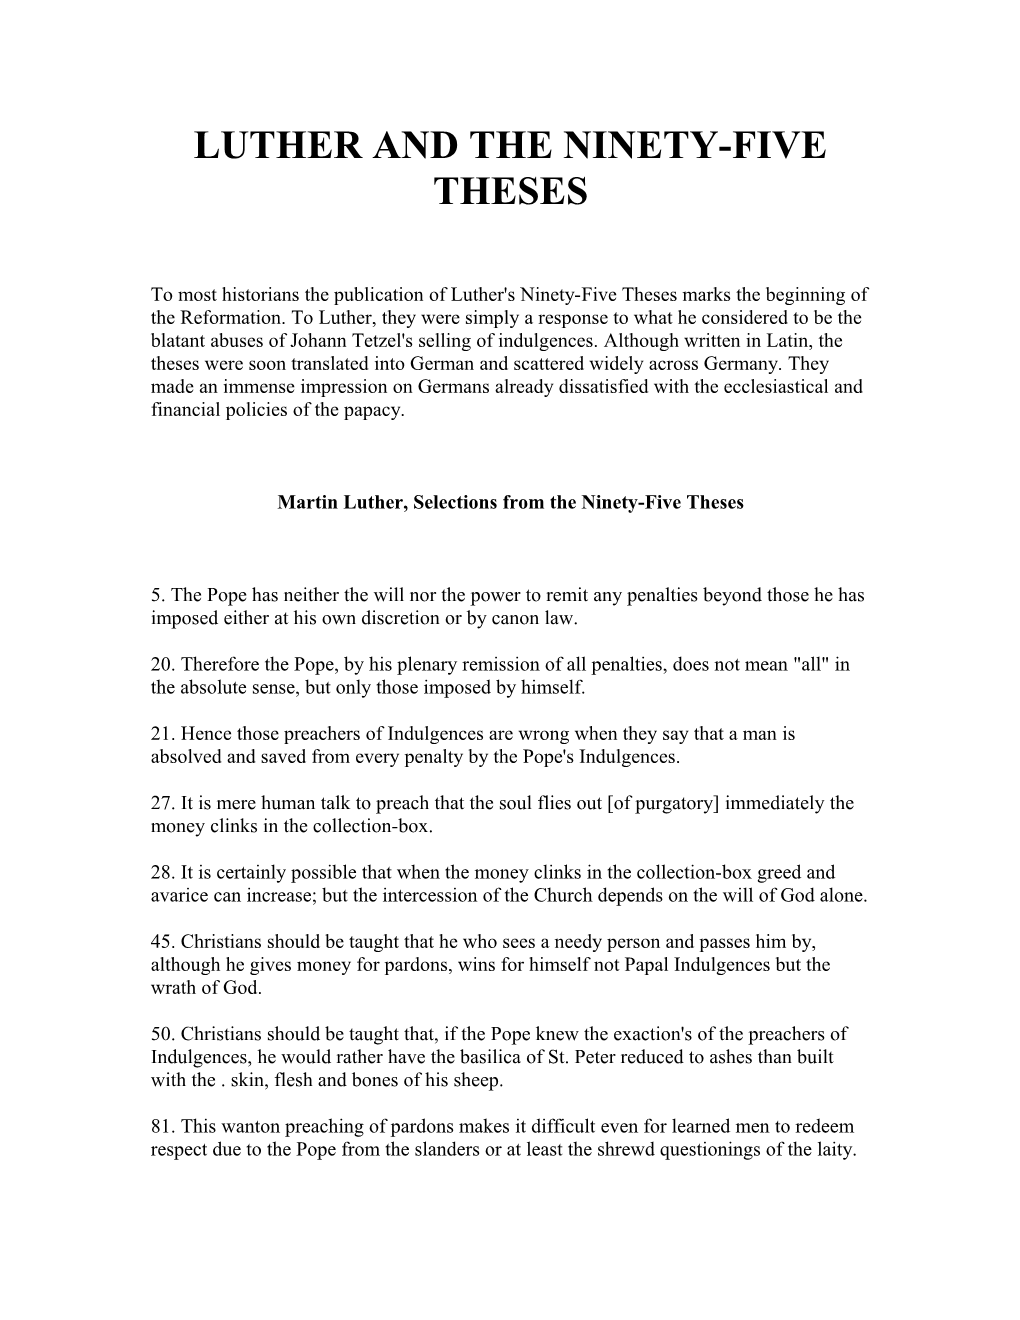 Luther and the Ninety-Five Theses